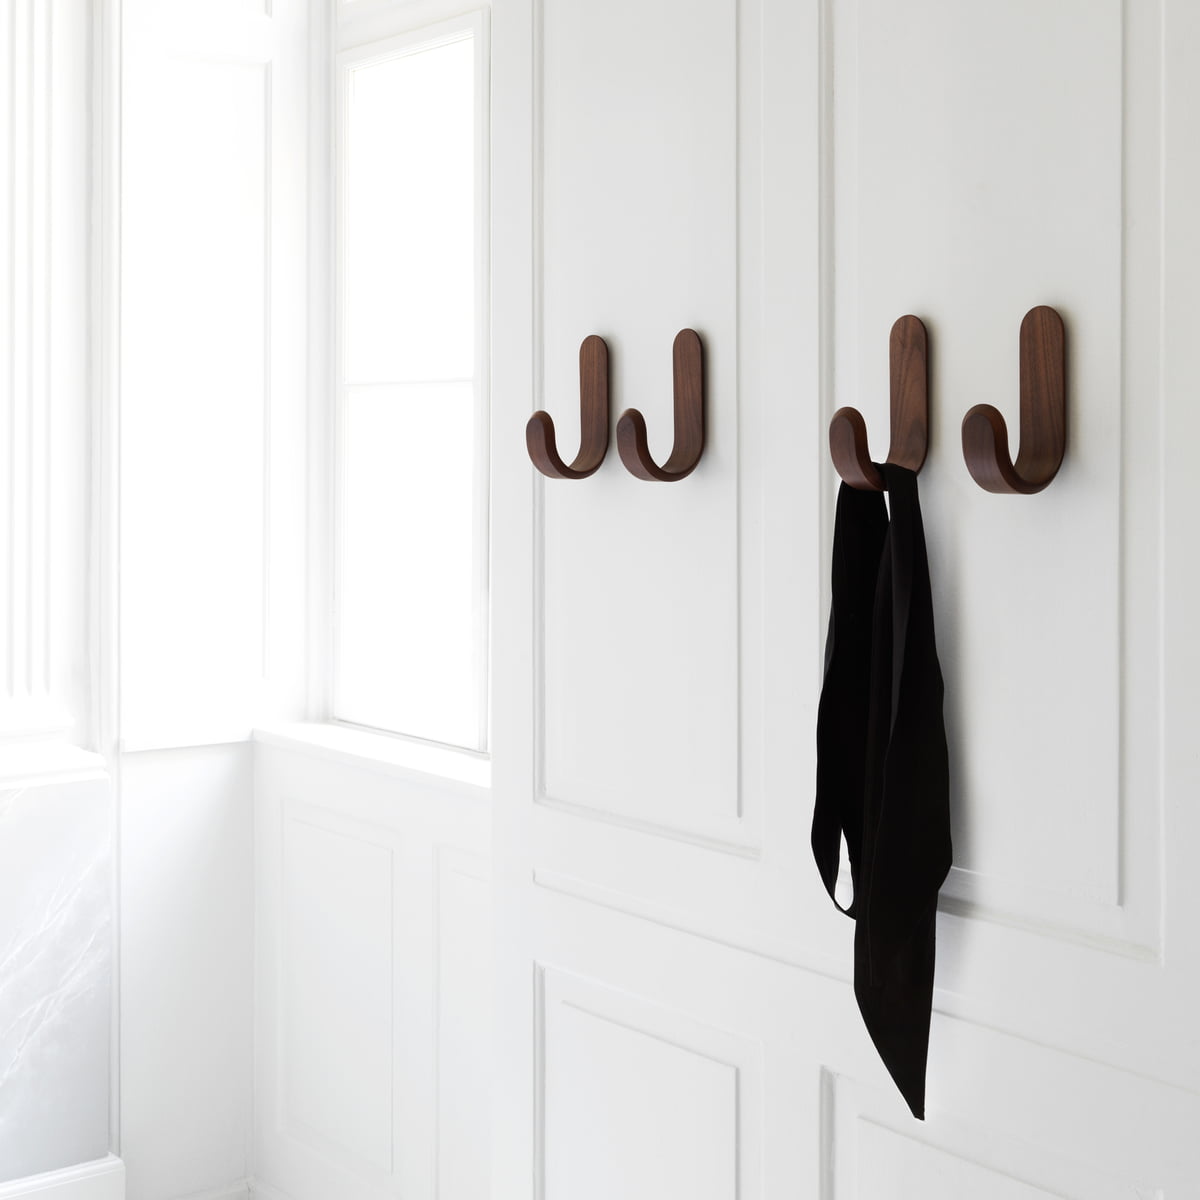 Walnut Wall Hooks Small Dot Hook Perfect for Hanging Coats, Bags